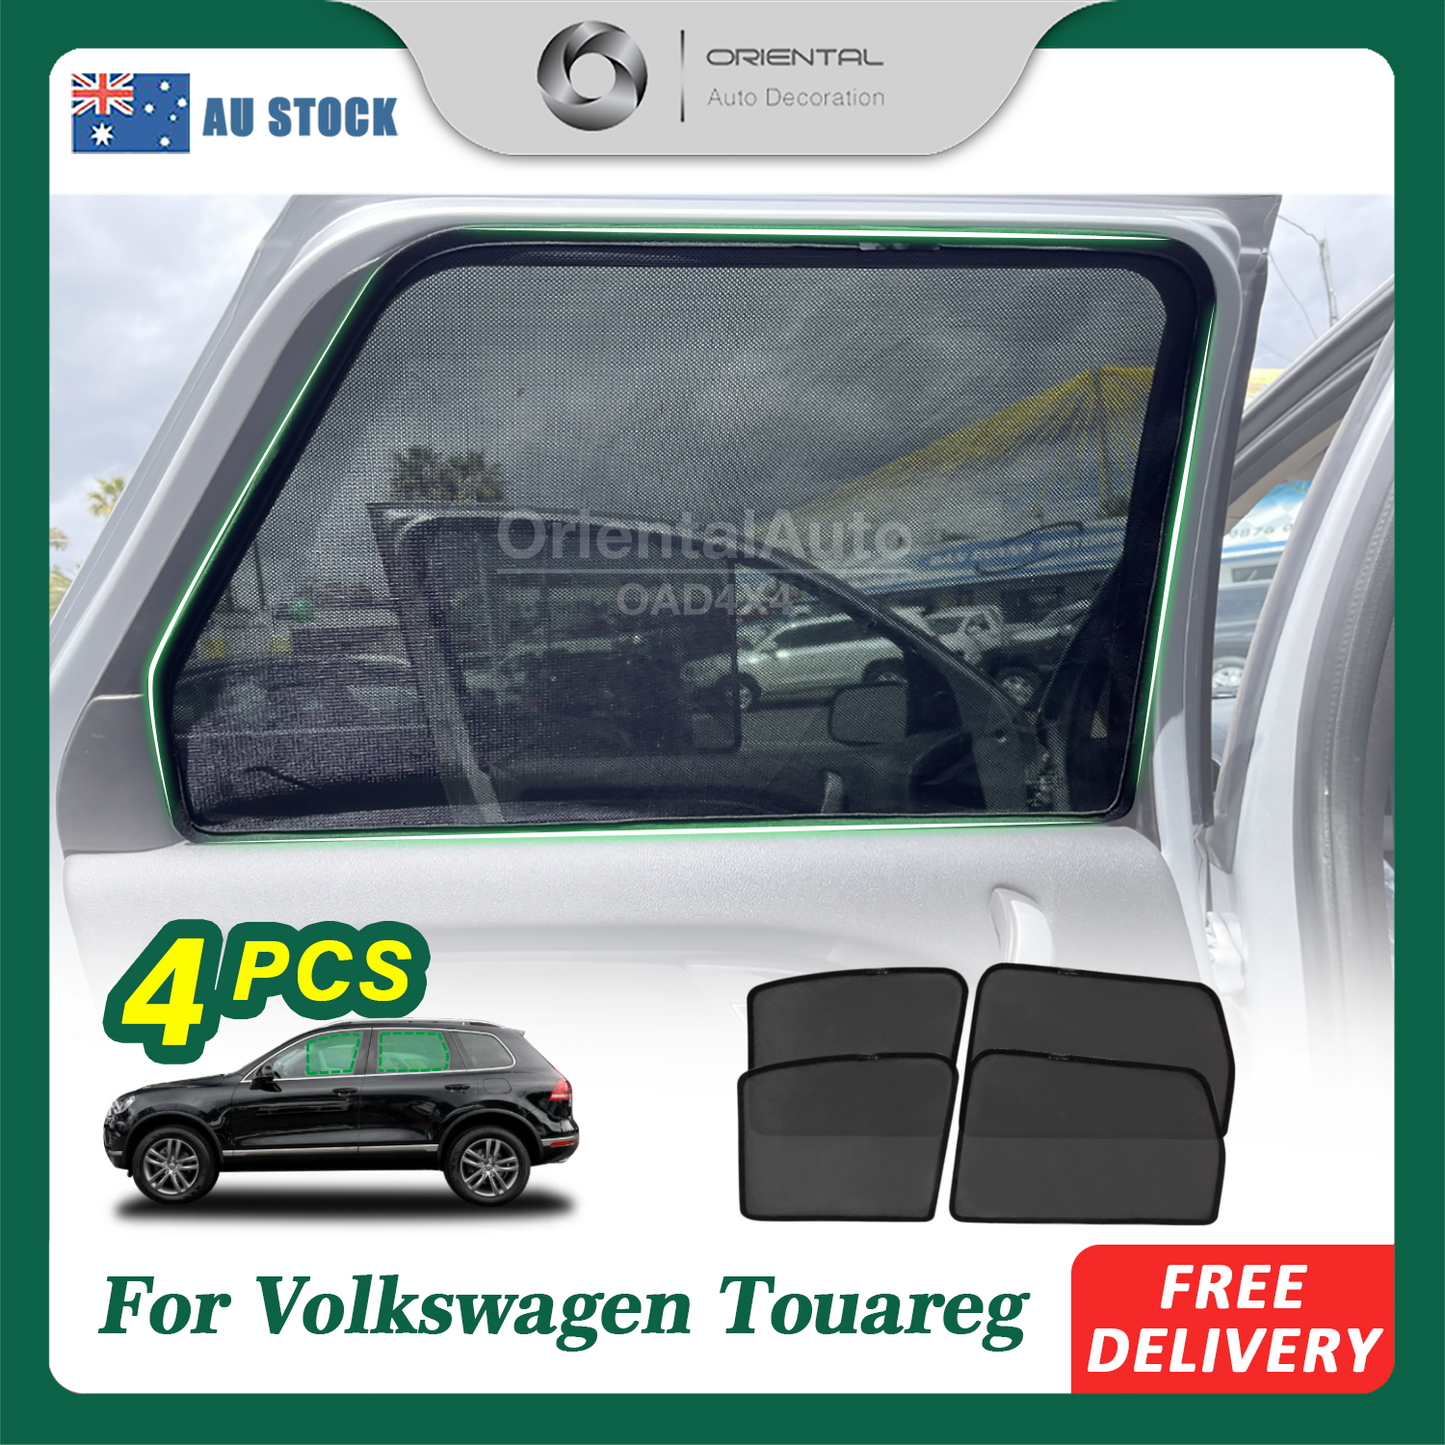 4PCS Magnetic Sun Shade for Volkswagen Touareg 7P 2011-2019 Window Sun Shades UV Protection Mesh Cover